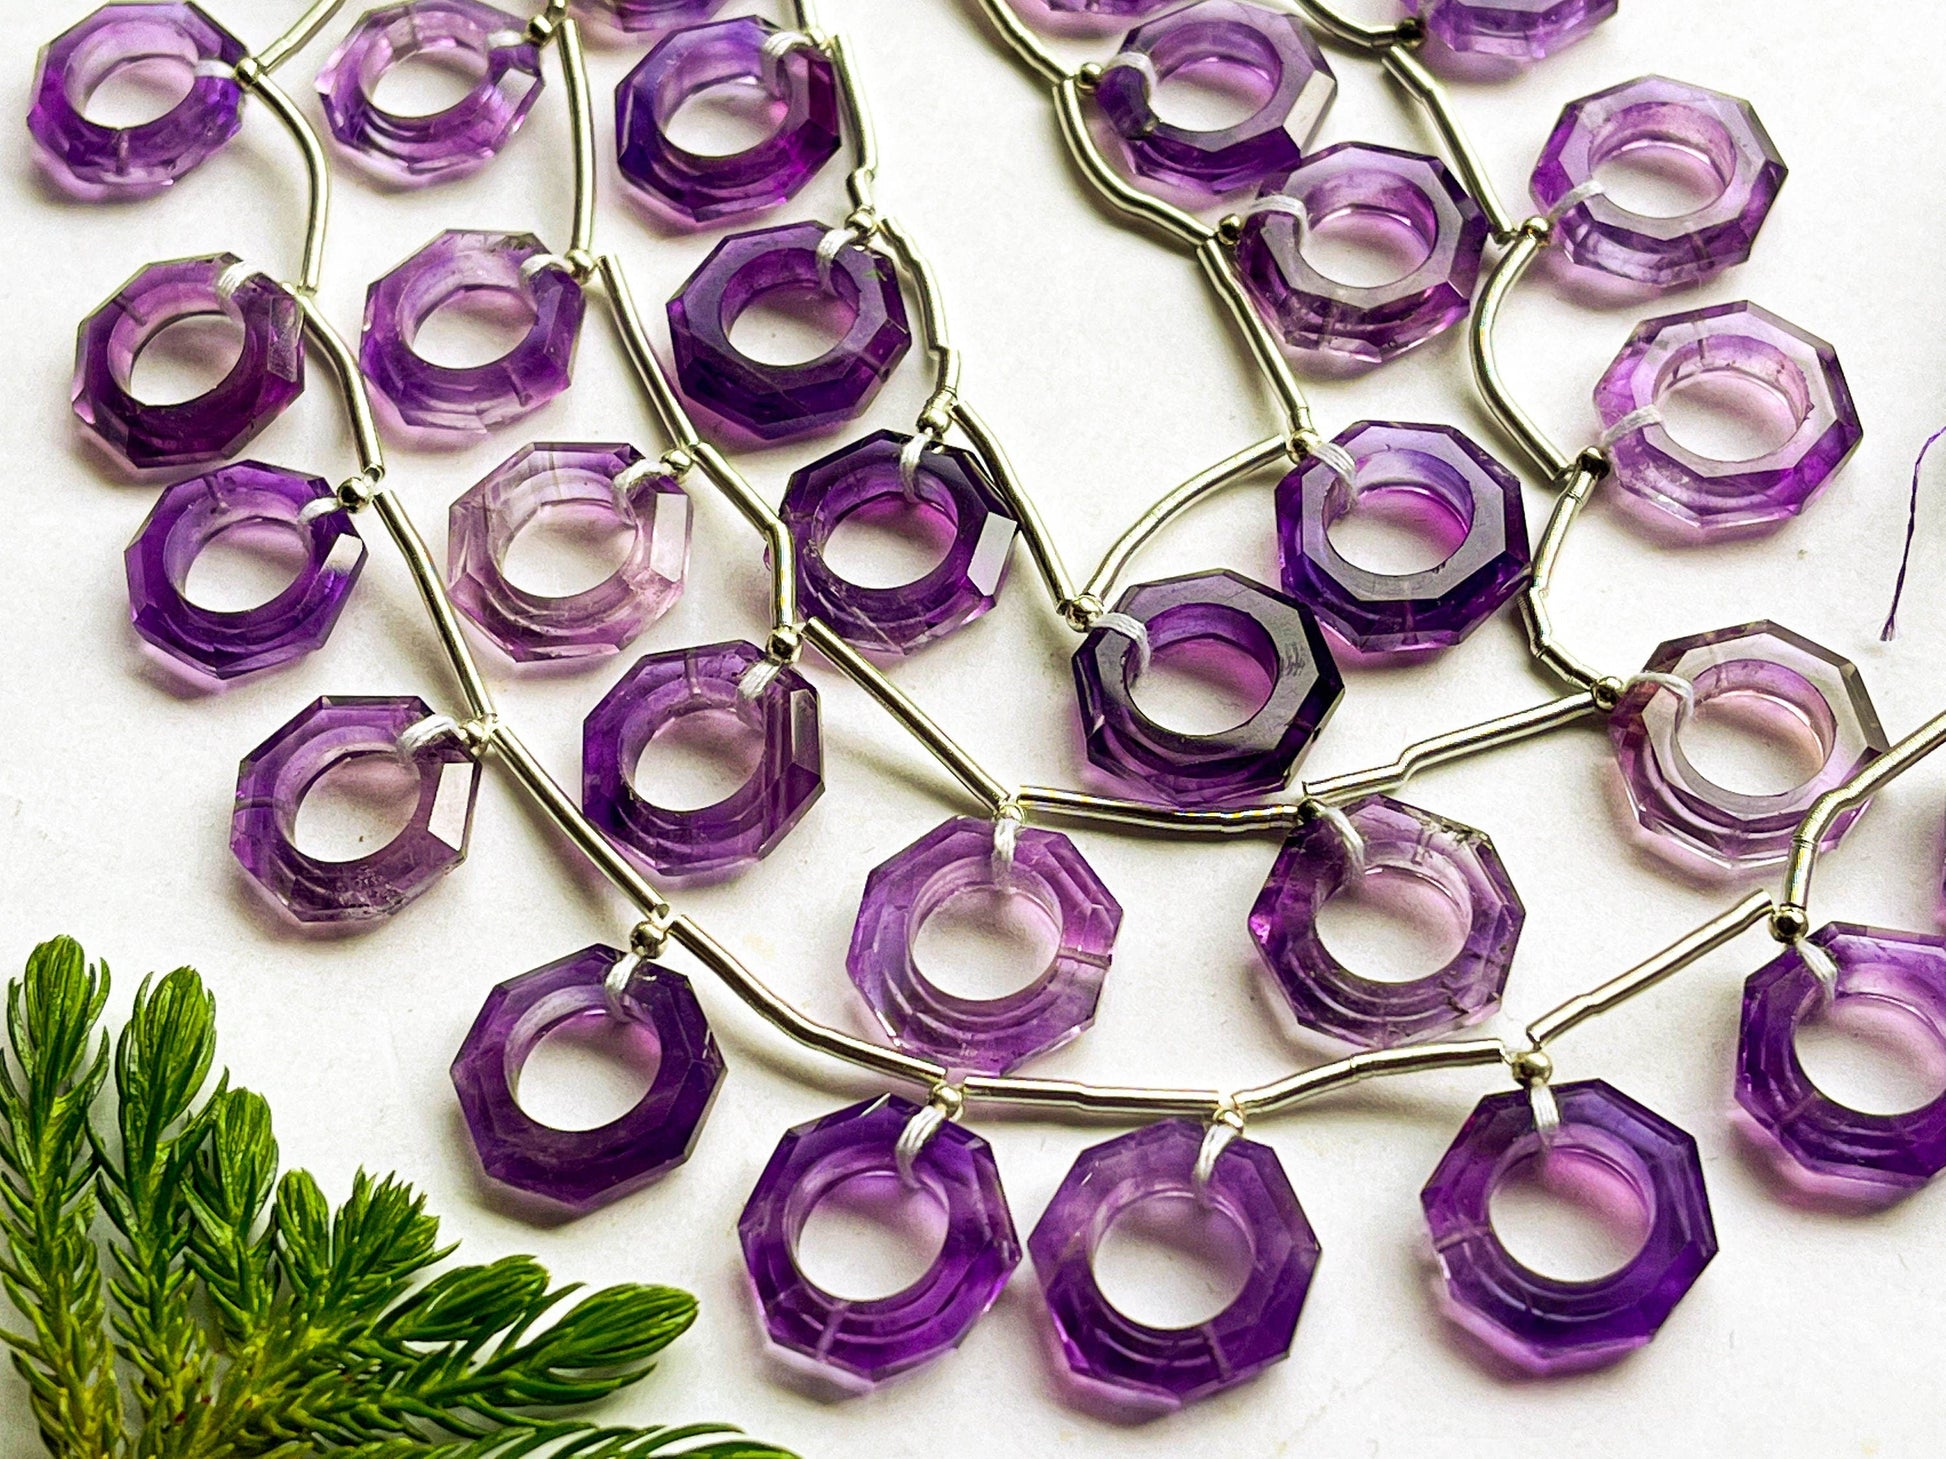 10 Pieces AMETHYST Octagon Shape Faceted Hoop Beads, Natural Amethyst Gemstone Beads, Amethyst Hoop Beads, Rare Gemstone Beads Beadsforyourjewelry